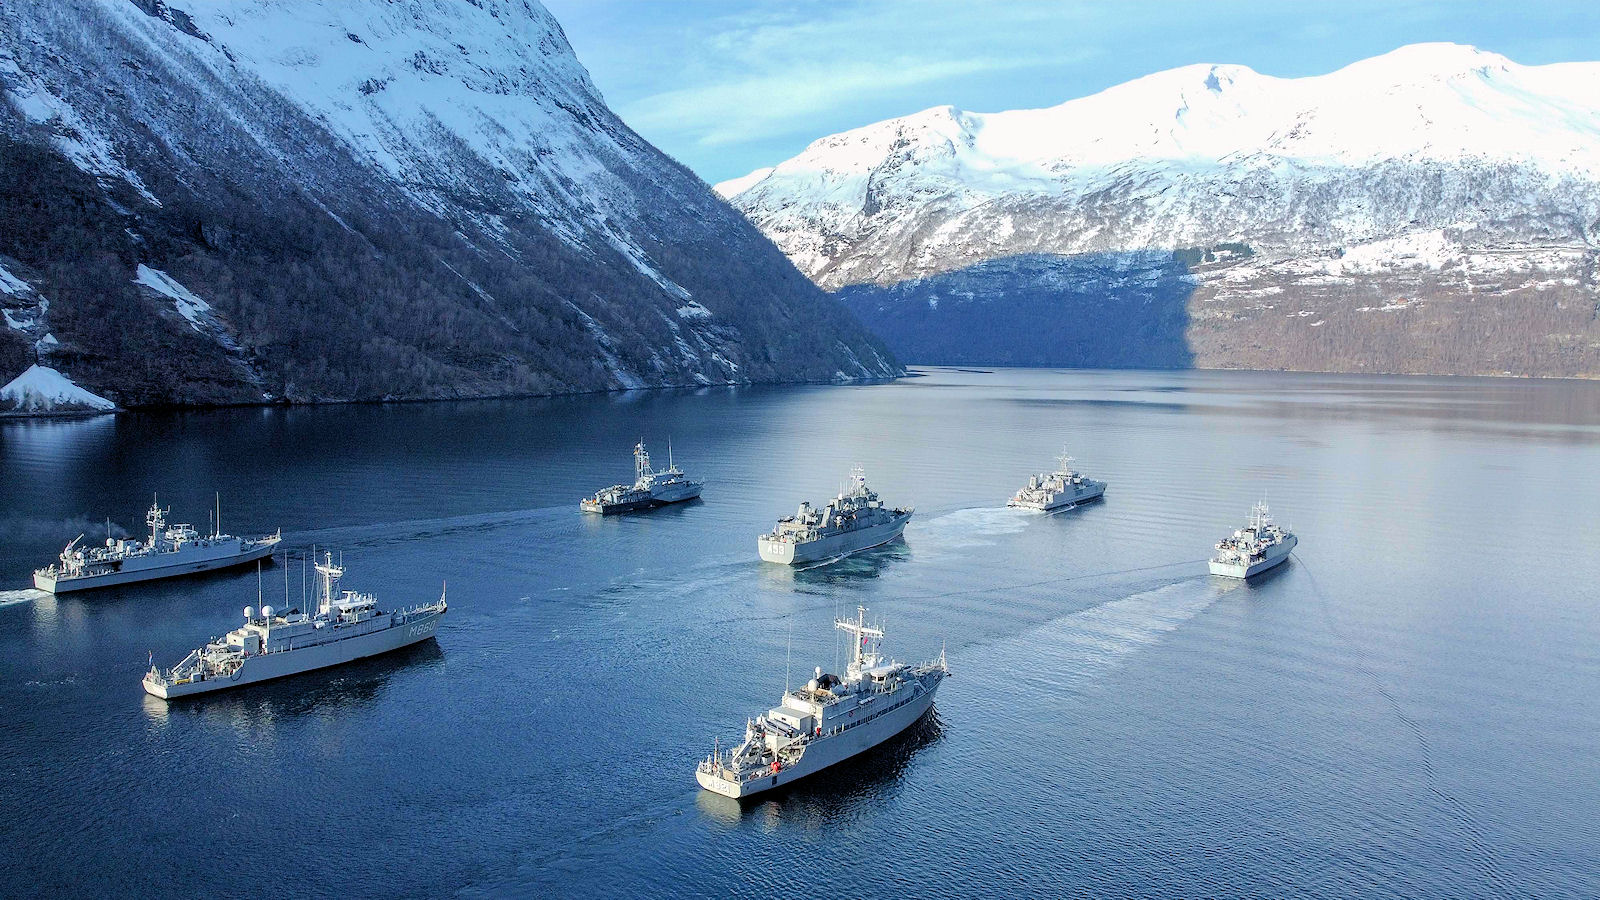 NATO's Mine Countermeasures Group 1 near Geiranger a few days ahead of Cold Response 2022 (Photo by Forsvaret)